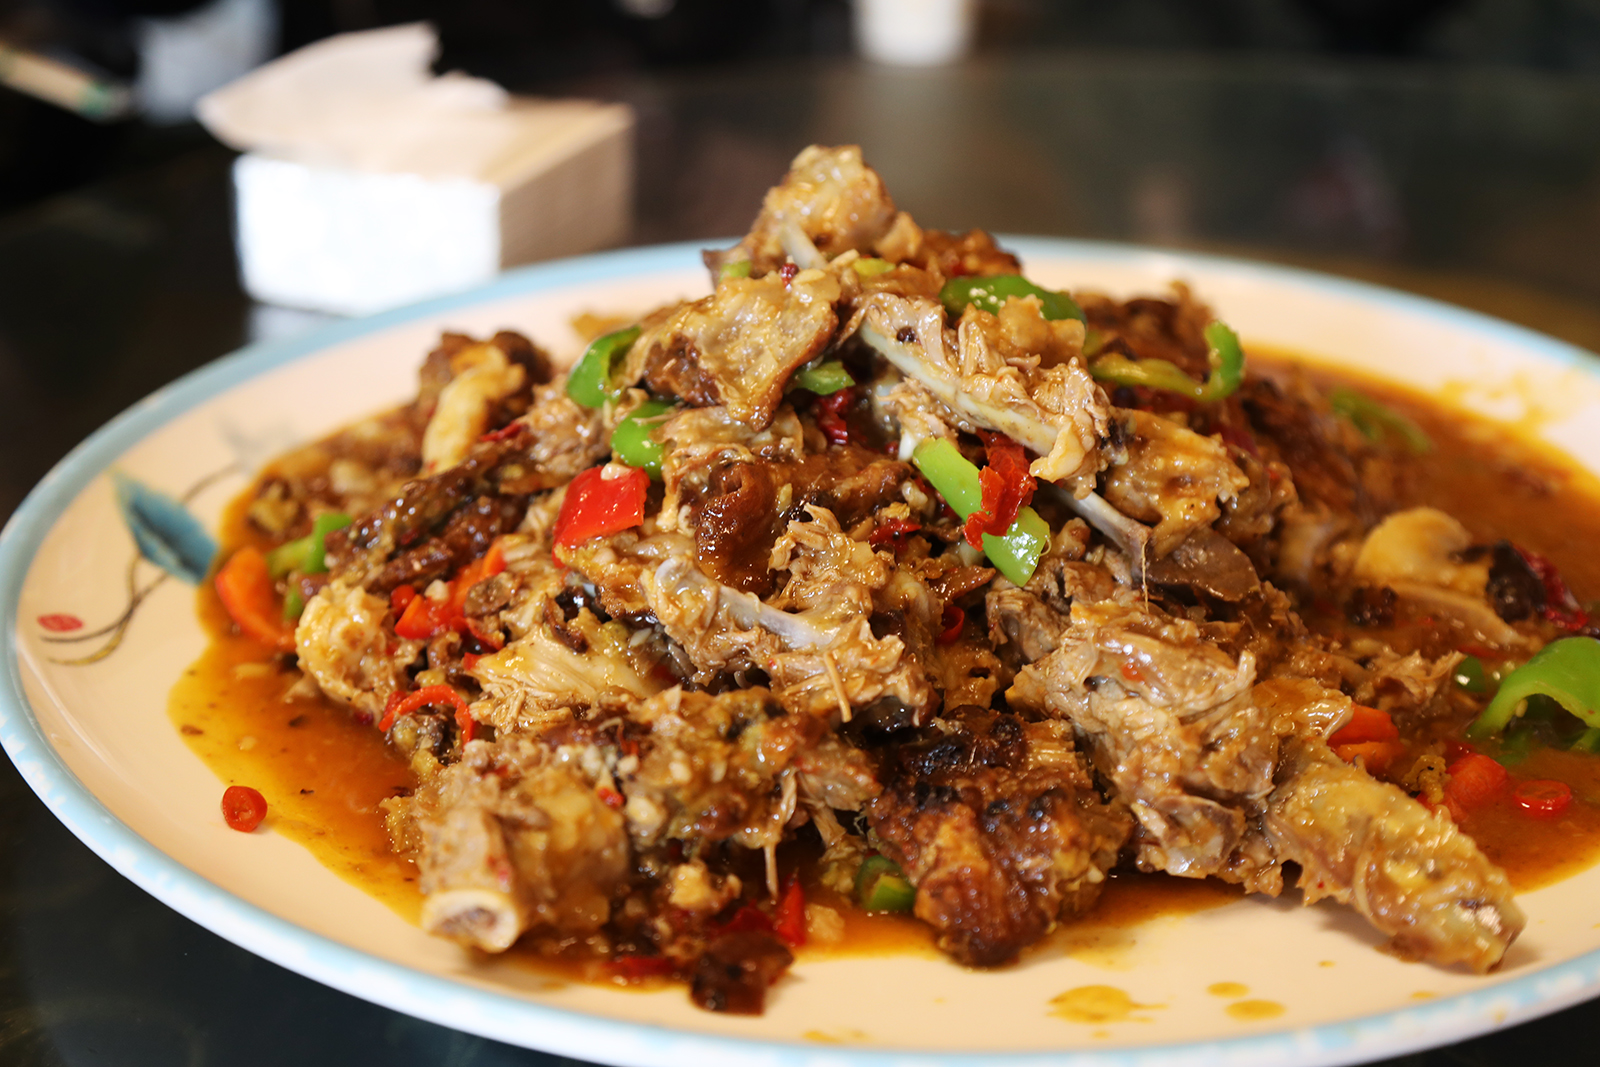 A dish of lamb with abundant spices and seasonings is a typical example of Xinjiang cuisine. /CGTN